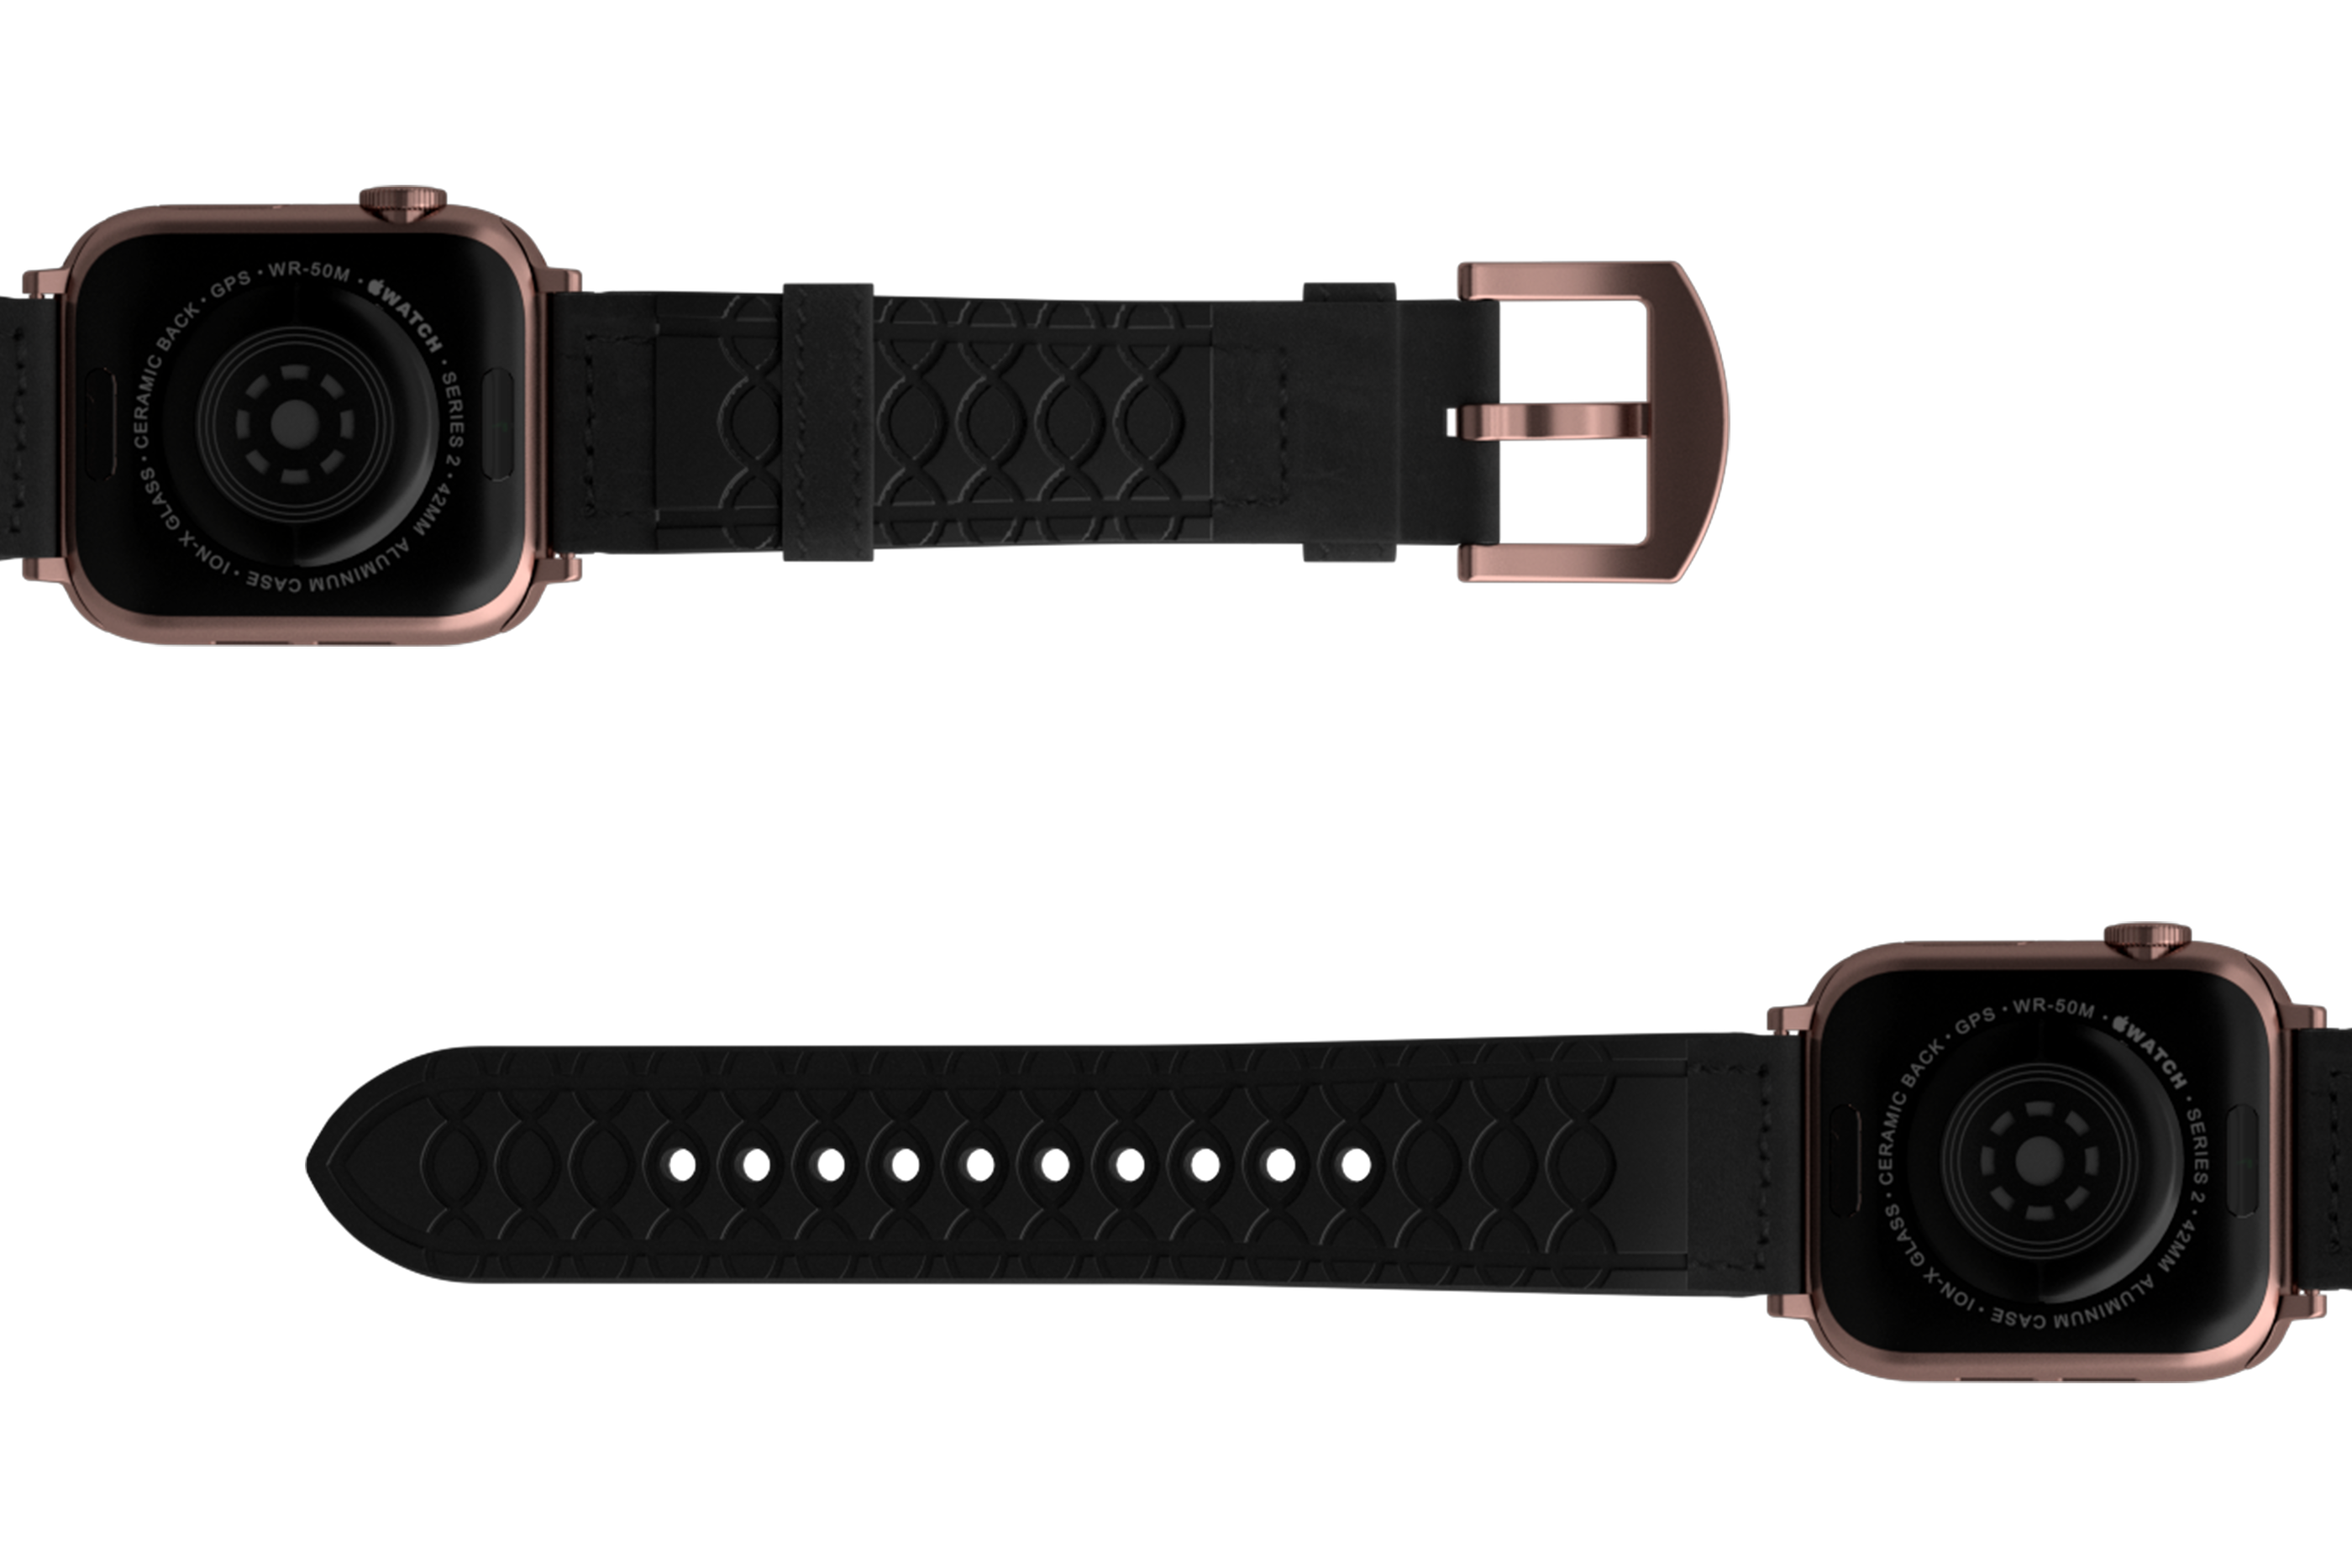 Vulcan Obsidian Black Leather Apple   watch band with rose gold hardware viewed bottom up